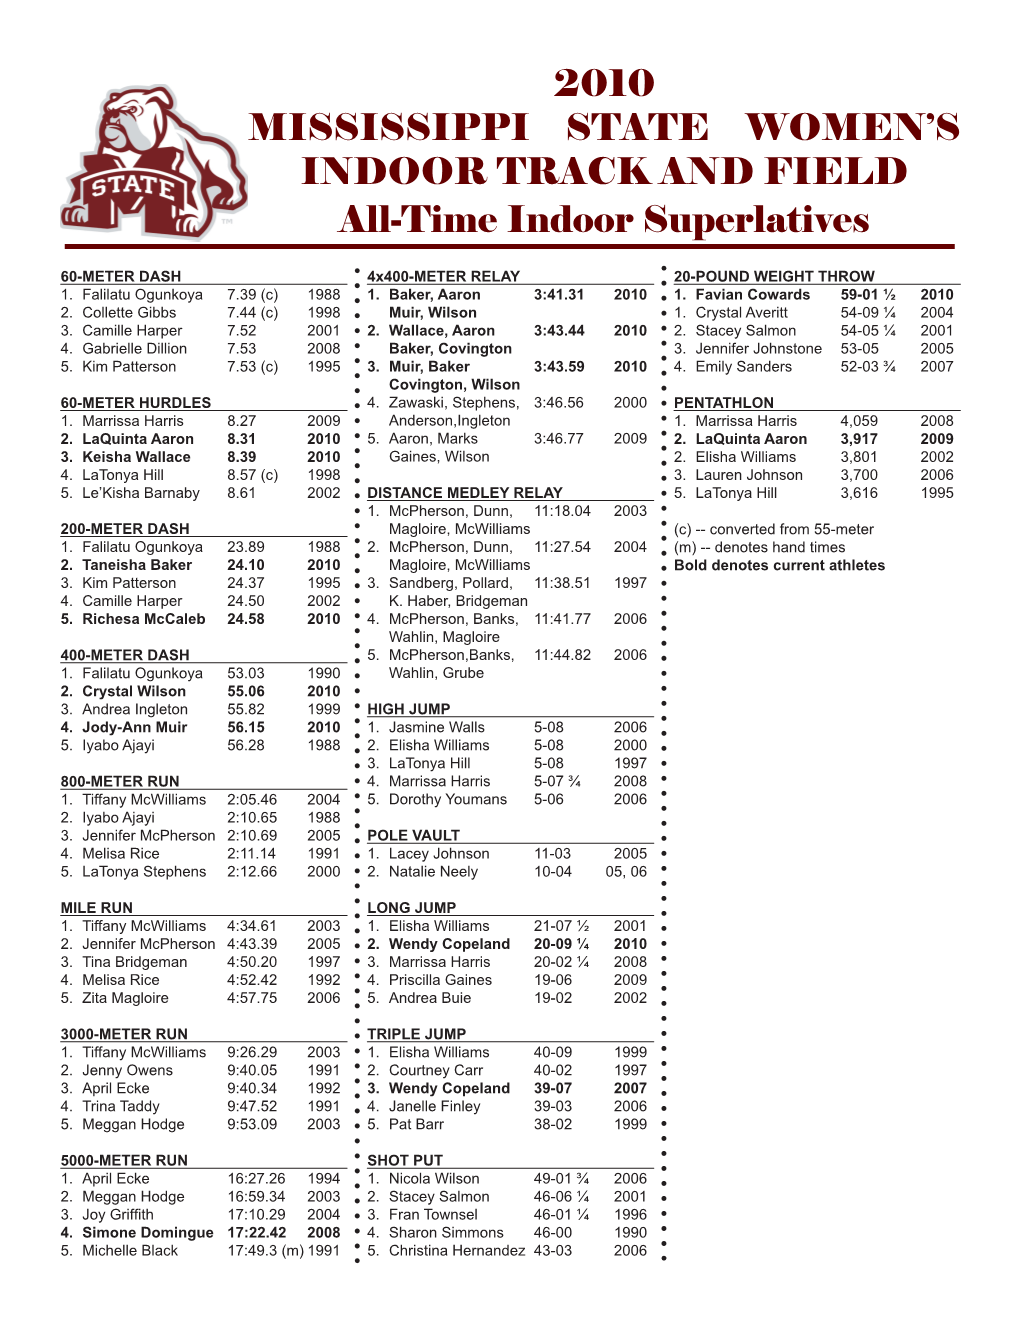 2010 MISSISSIPPI STATE WOMEN's INDOOR TRACK and FIELD All